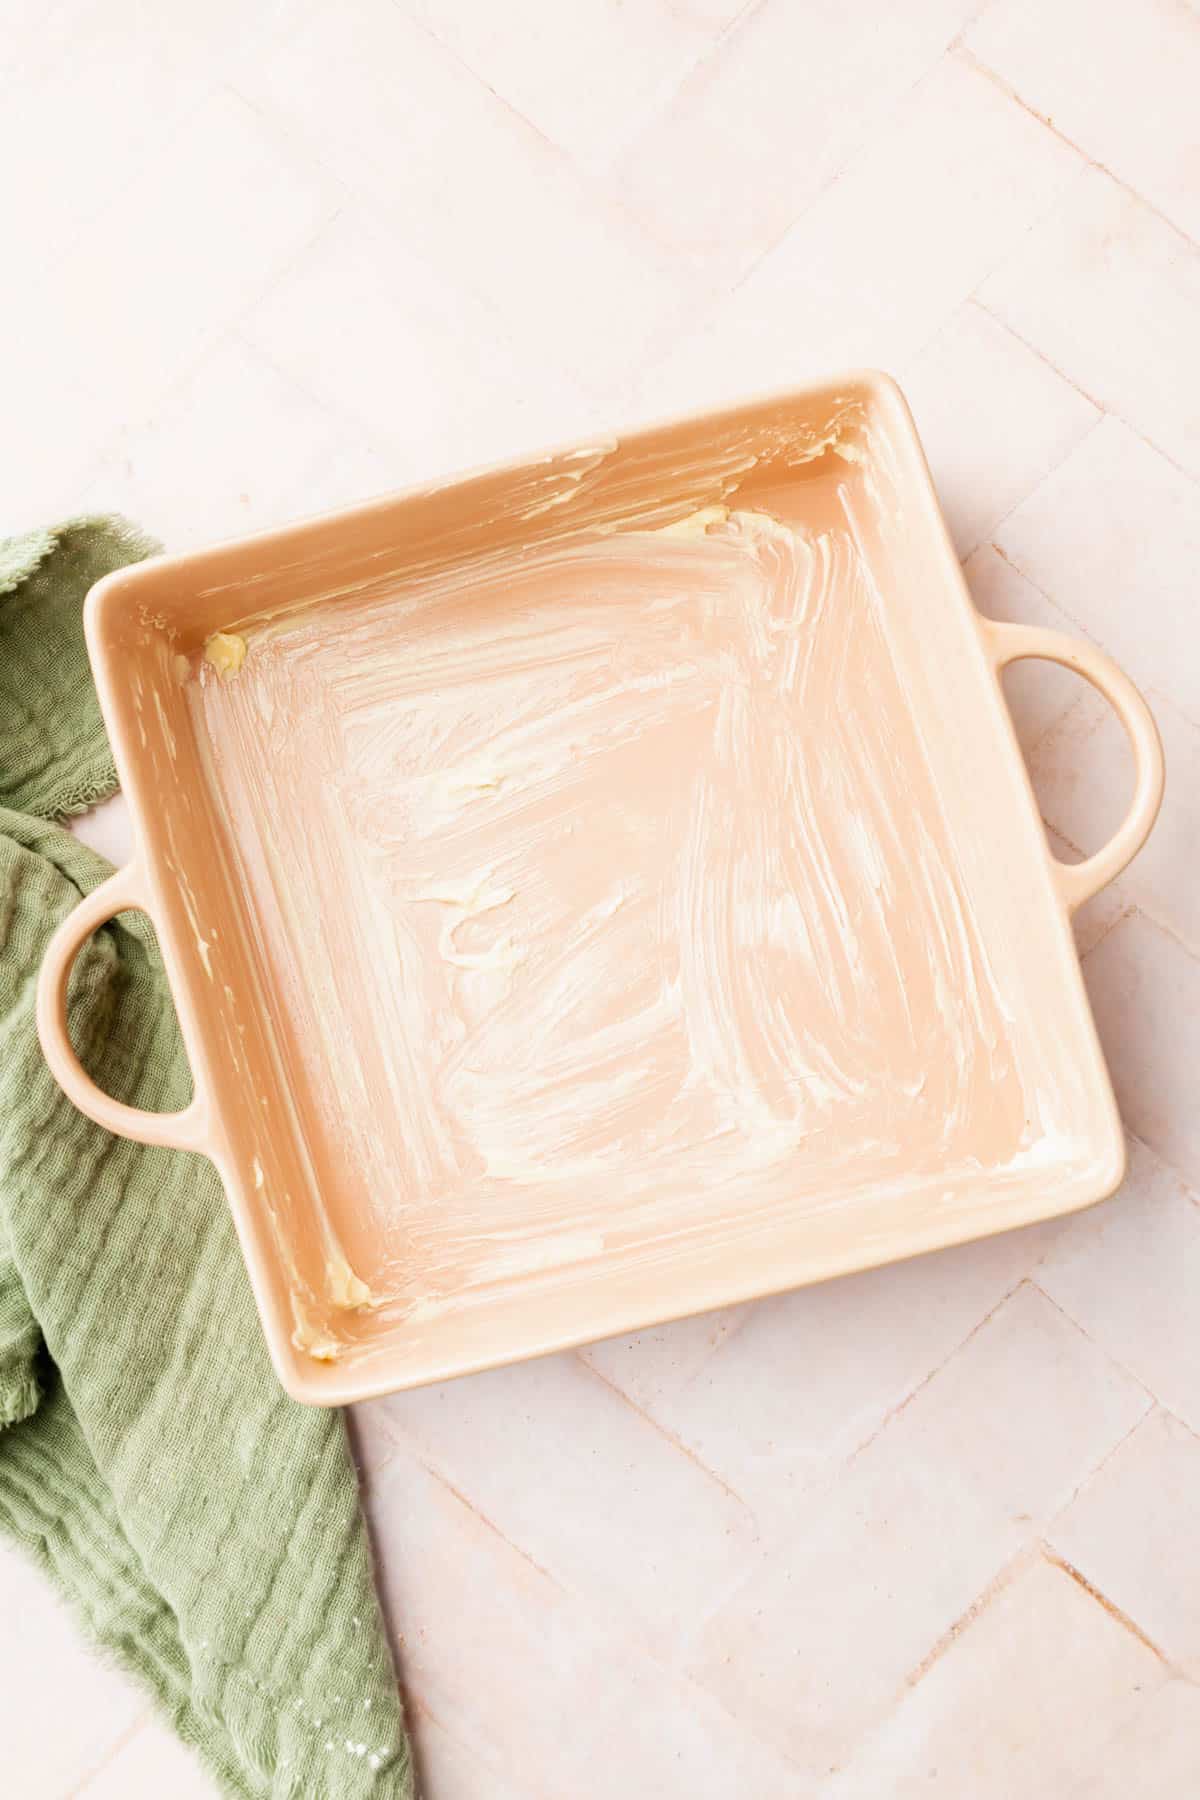 A buttered square baking dish with handles on top of a pink surface.